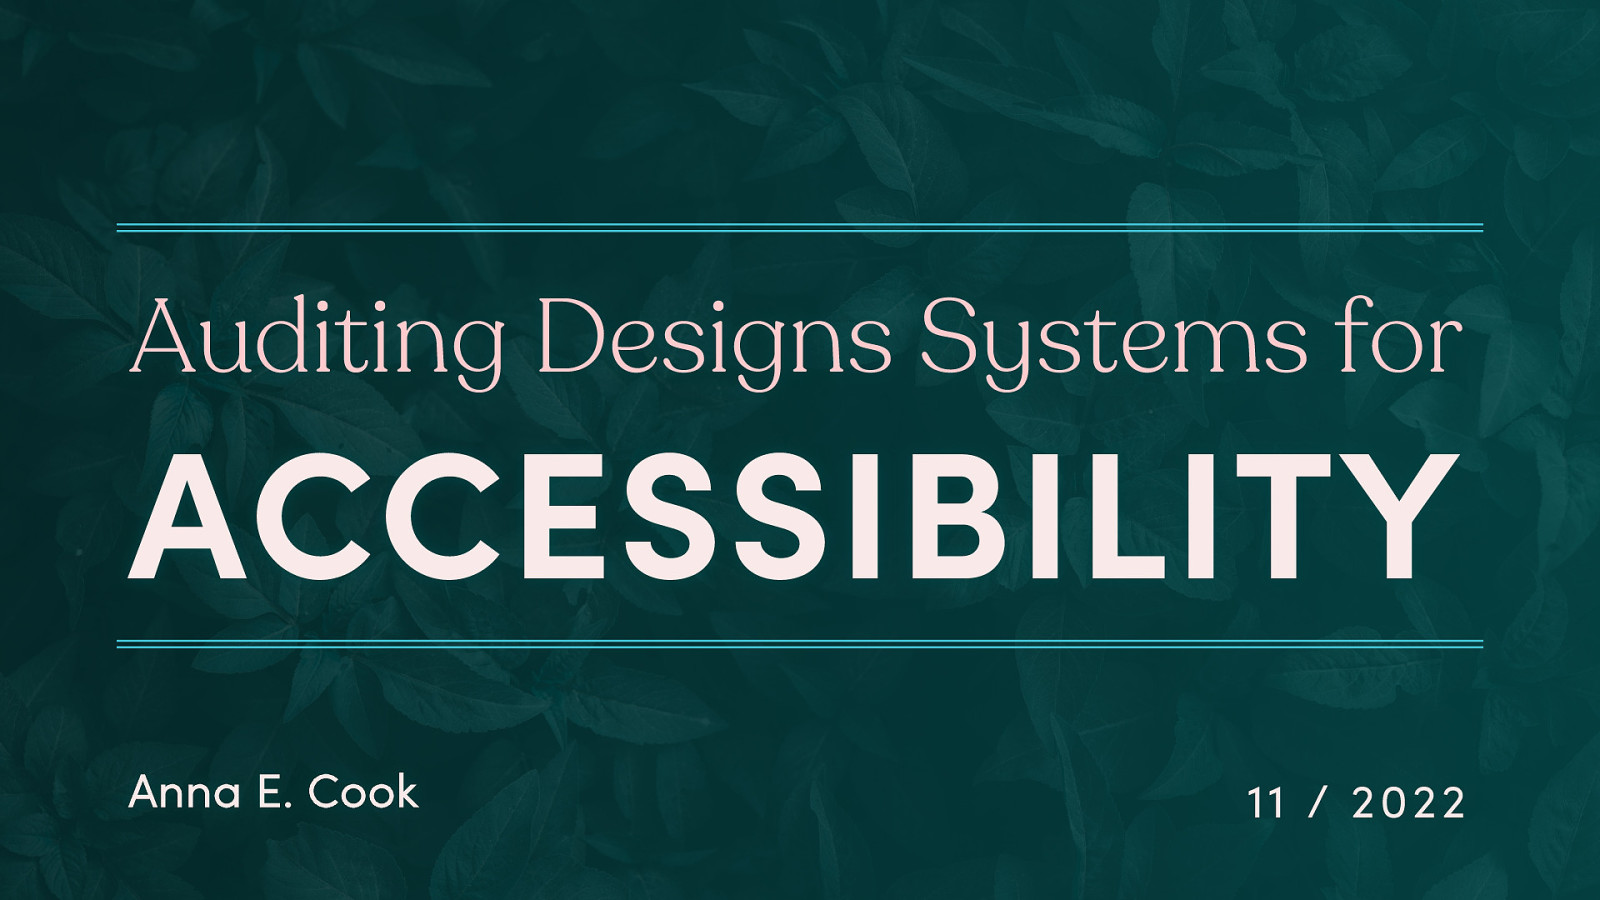 Auditing Designs Systems for Accessibility